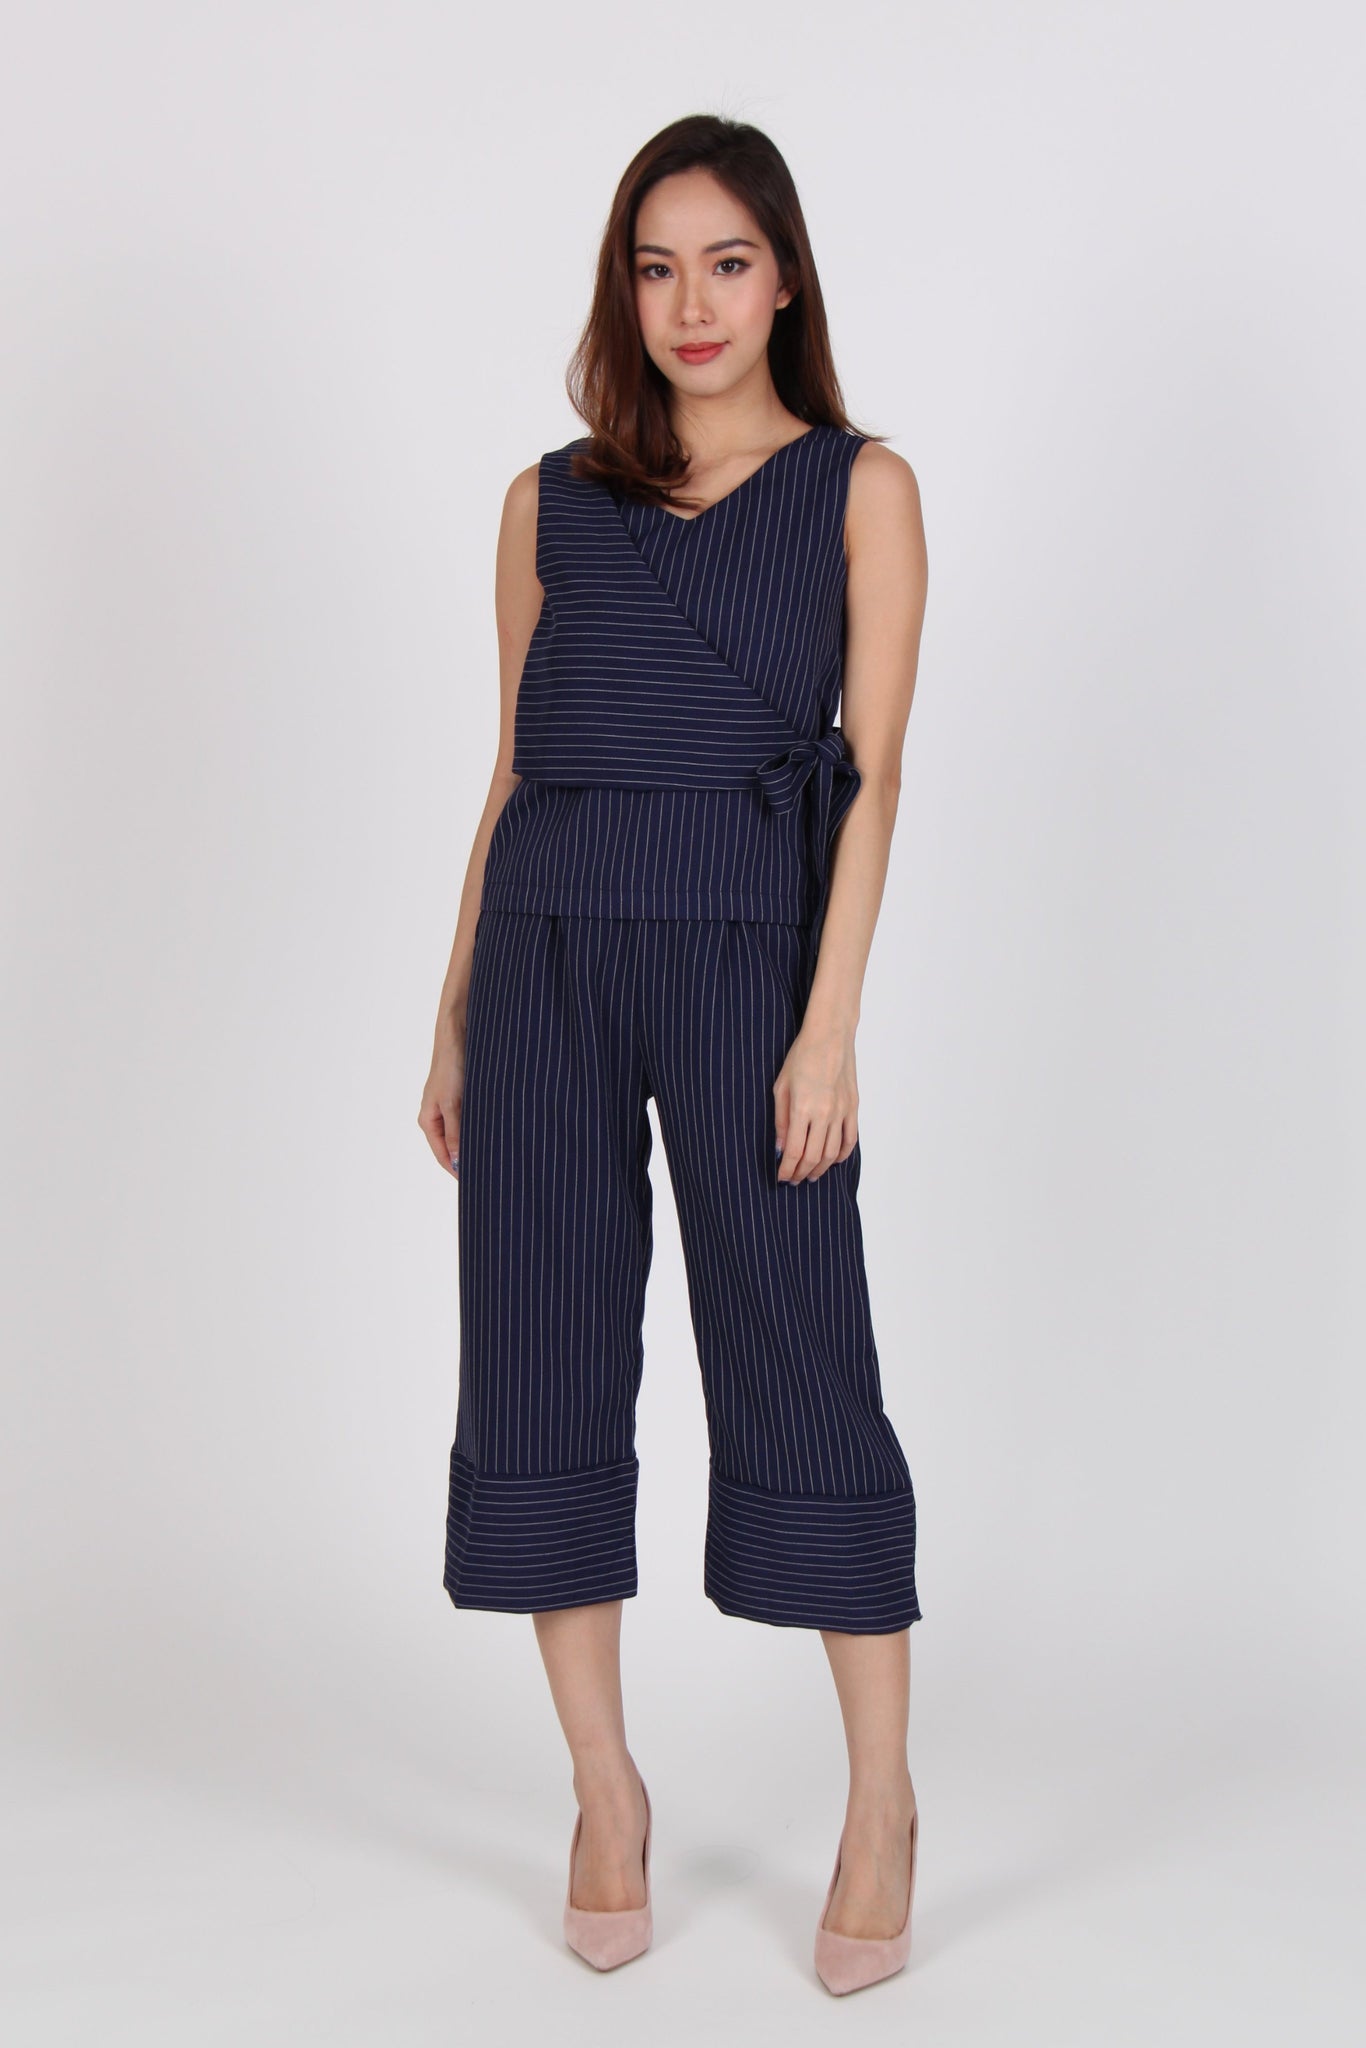 2 Piece Pinstripe Side Overlap Top with Culottes in Navy Blue